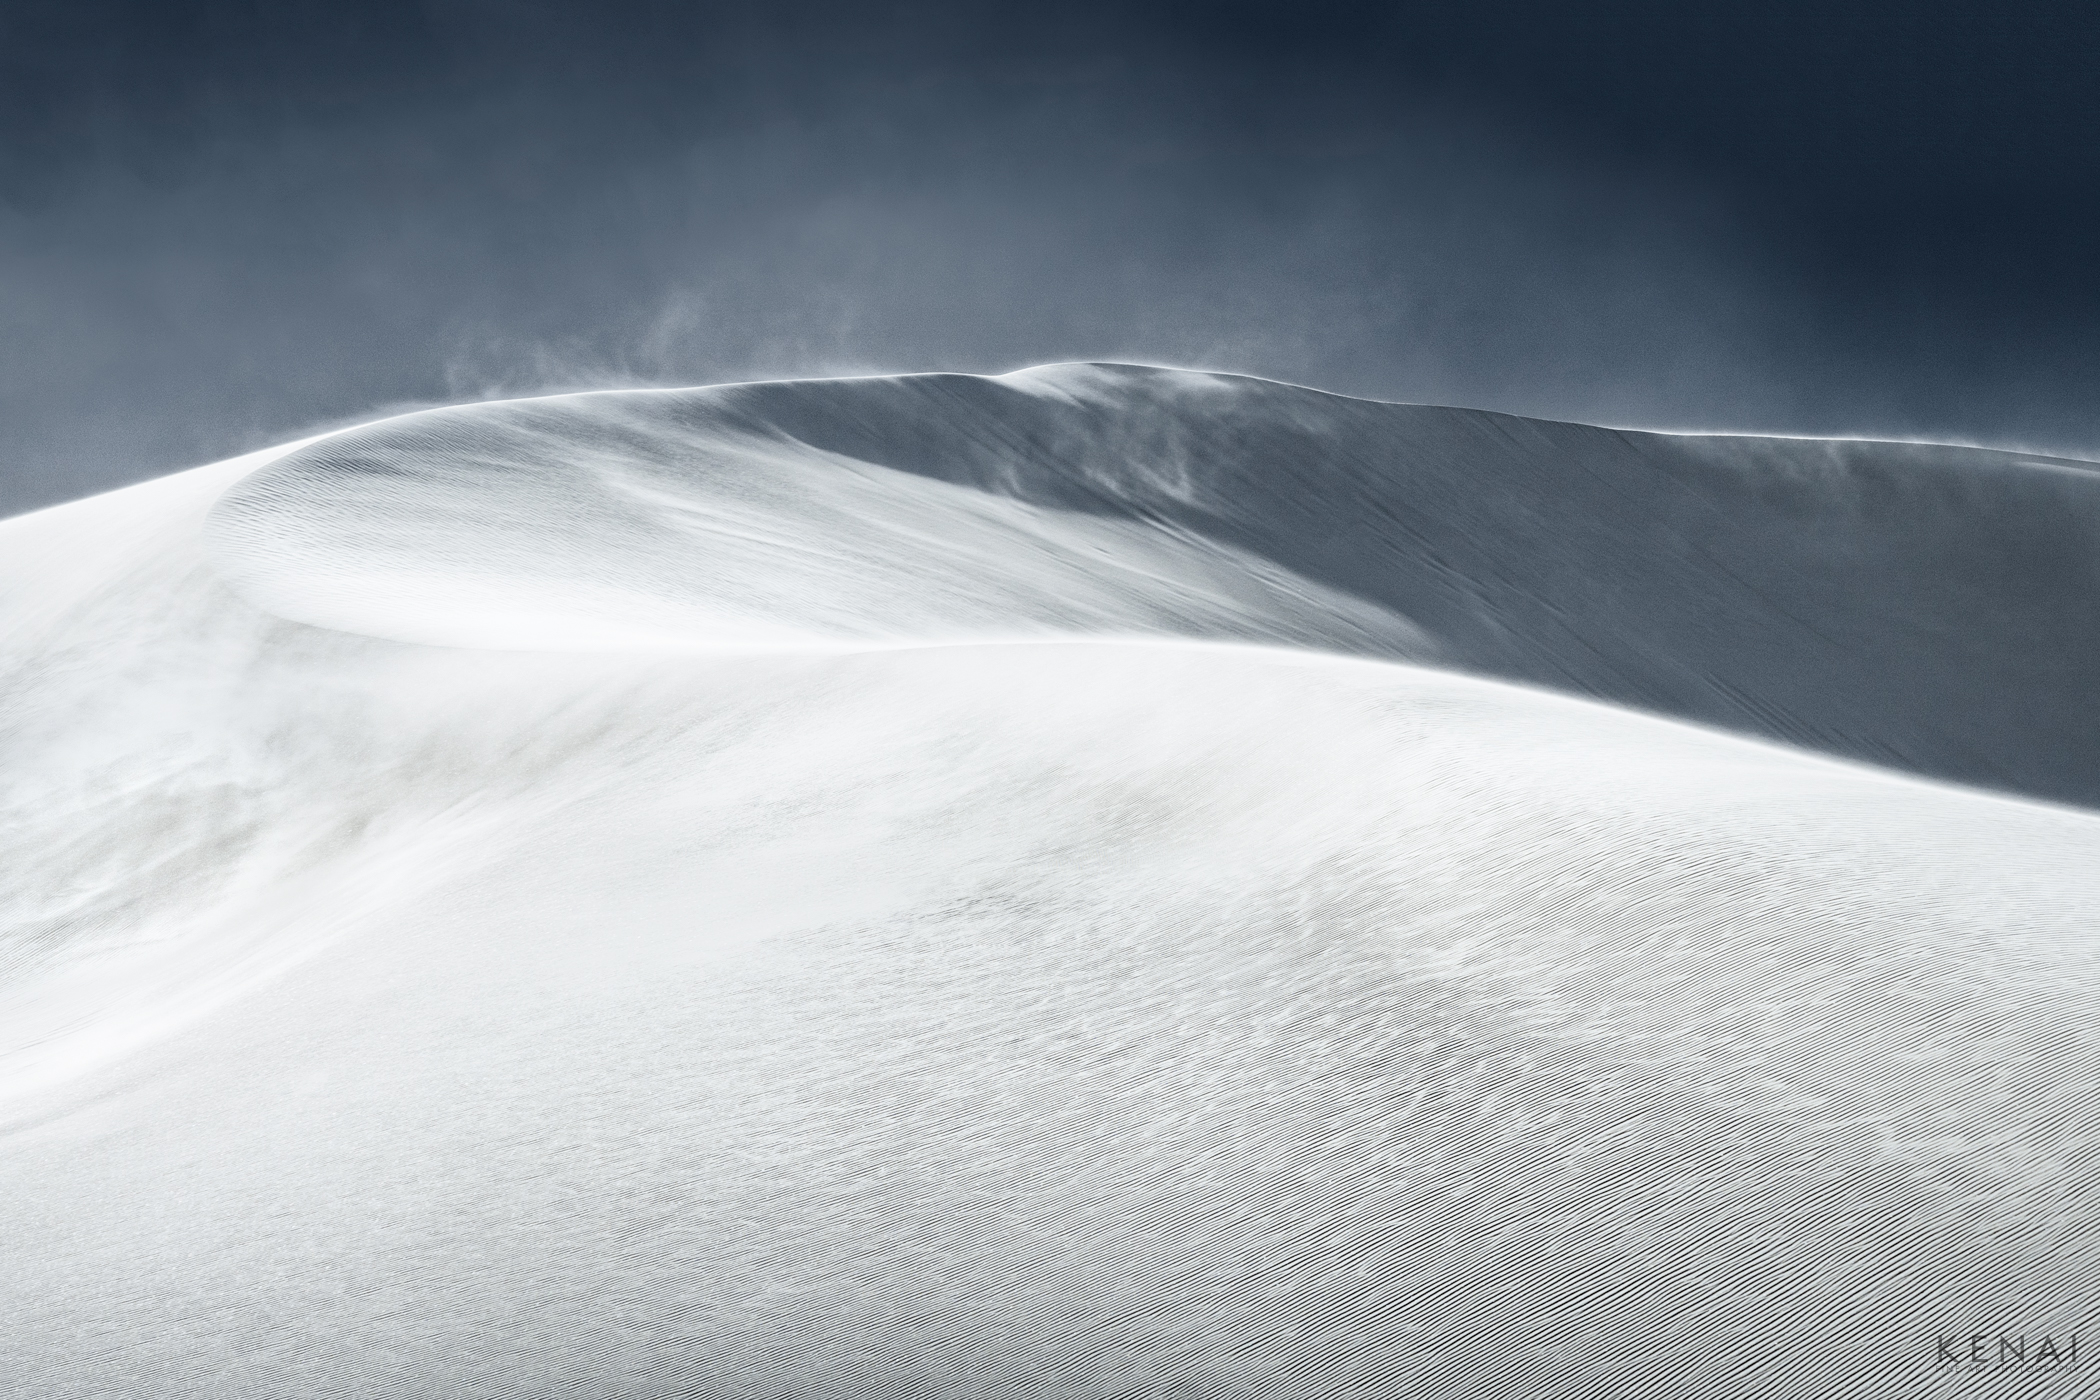 Strong winds create waves of gypsum at White Sands National Park in New Mexico.